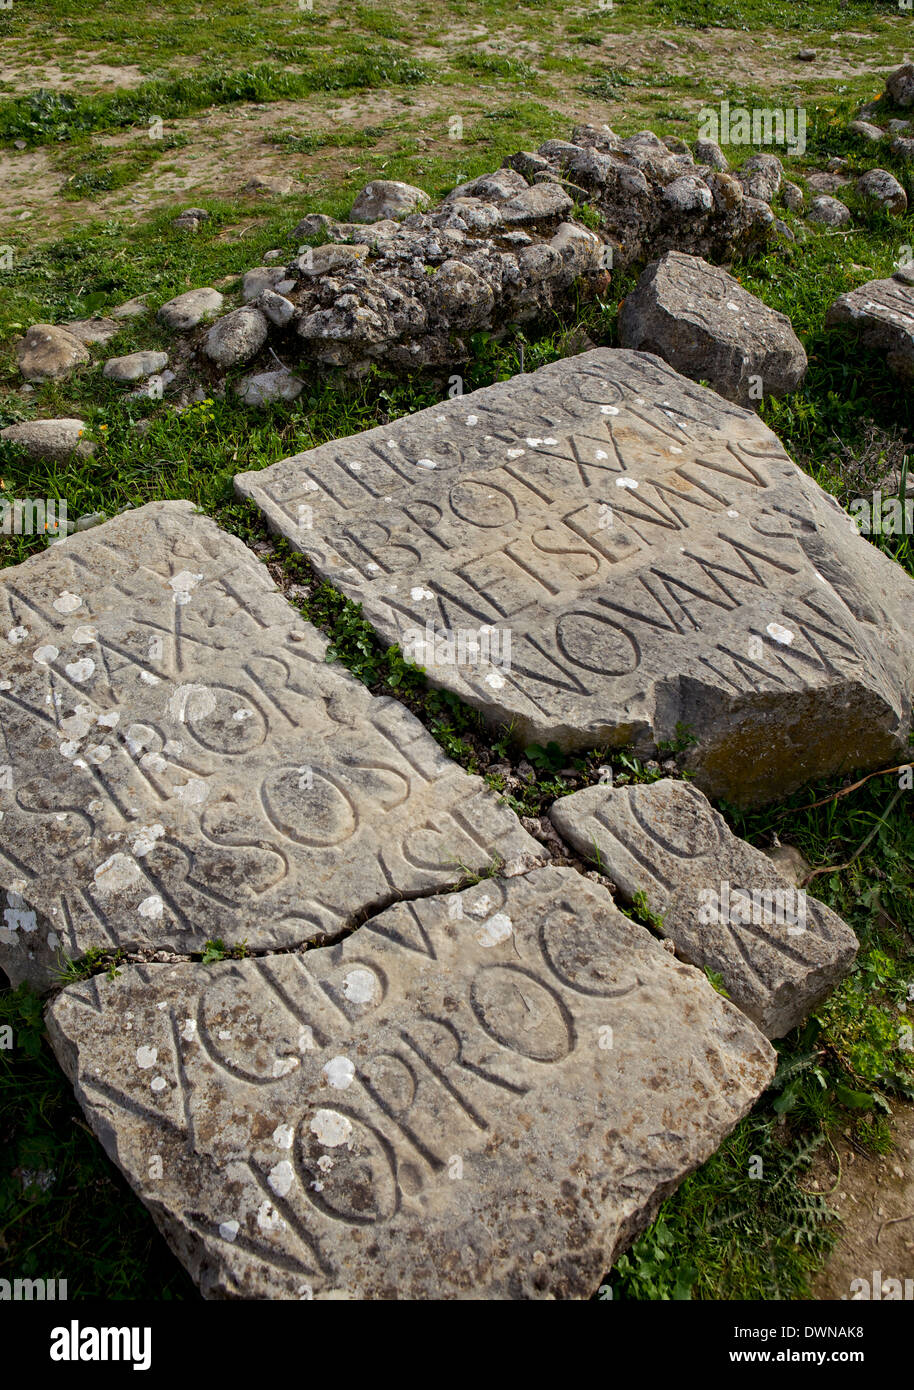 Carving on stone at the Roman archaeological site, Volubilis, UNESCO Site, Meknes Region, Morocco, North Africa, Africa Stock Photo